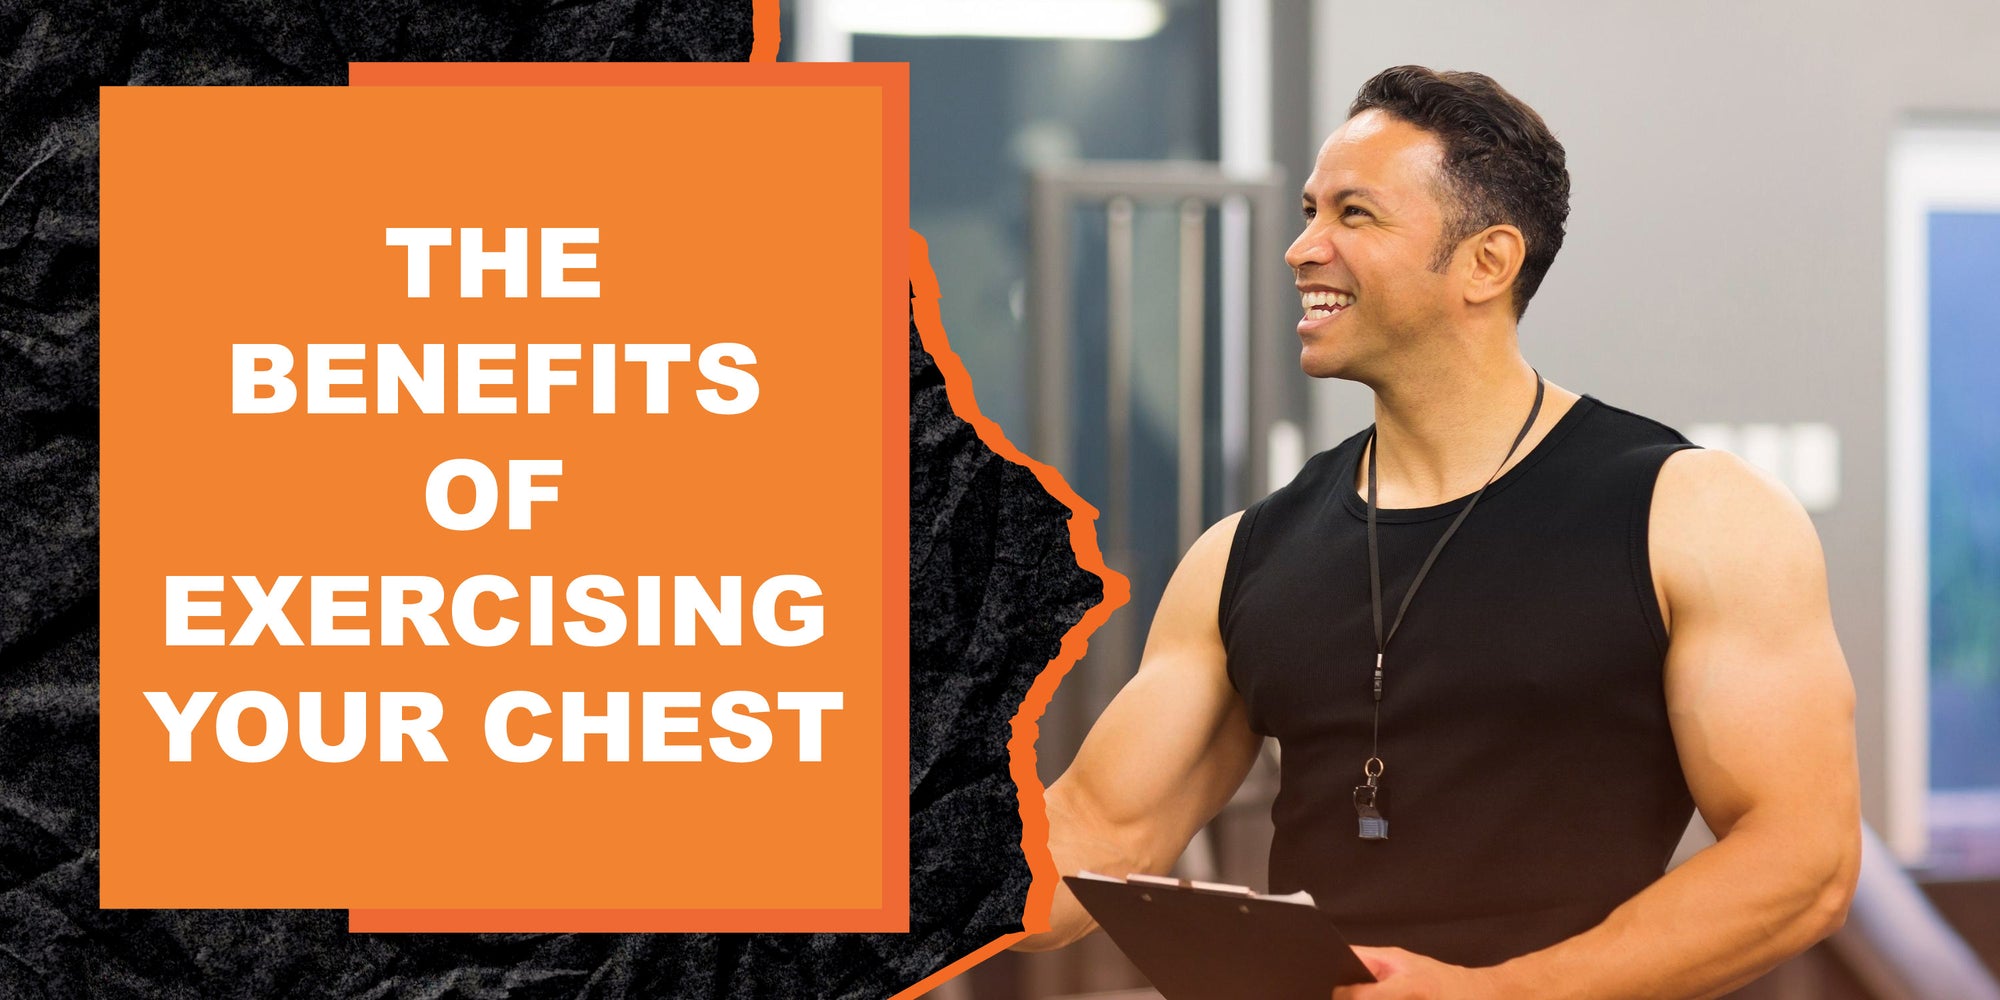 The Benefits of Exercising Your Chest